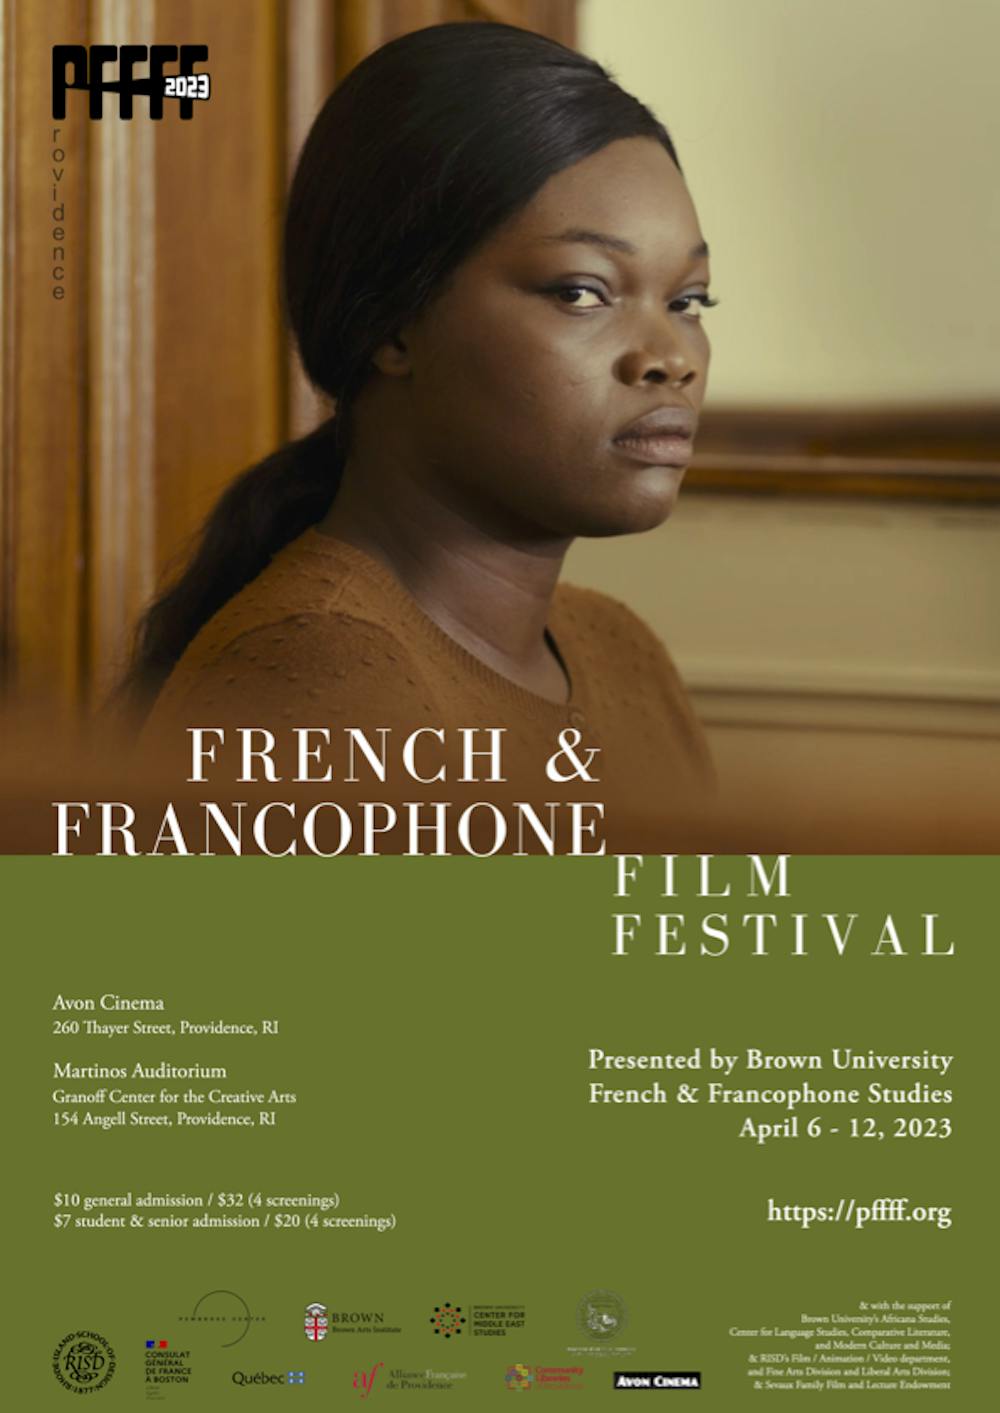 <p>In addition to debuting contemporary French films to Providence audiences, the festival will screen two films by Jean-Luc Goddard to commemorate the late director.</p><p>Courtesy of Brown University French and Francophone Studies</p>